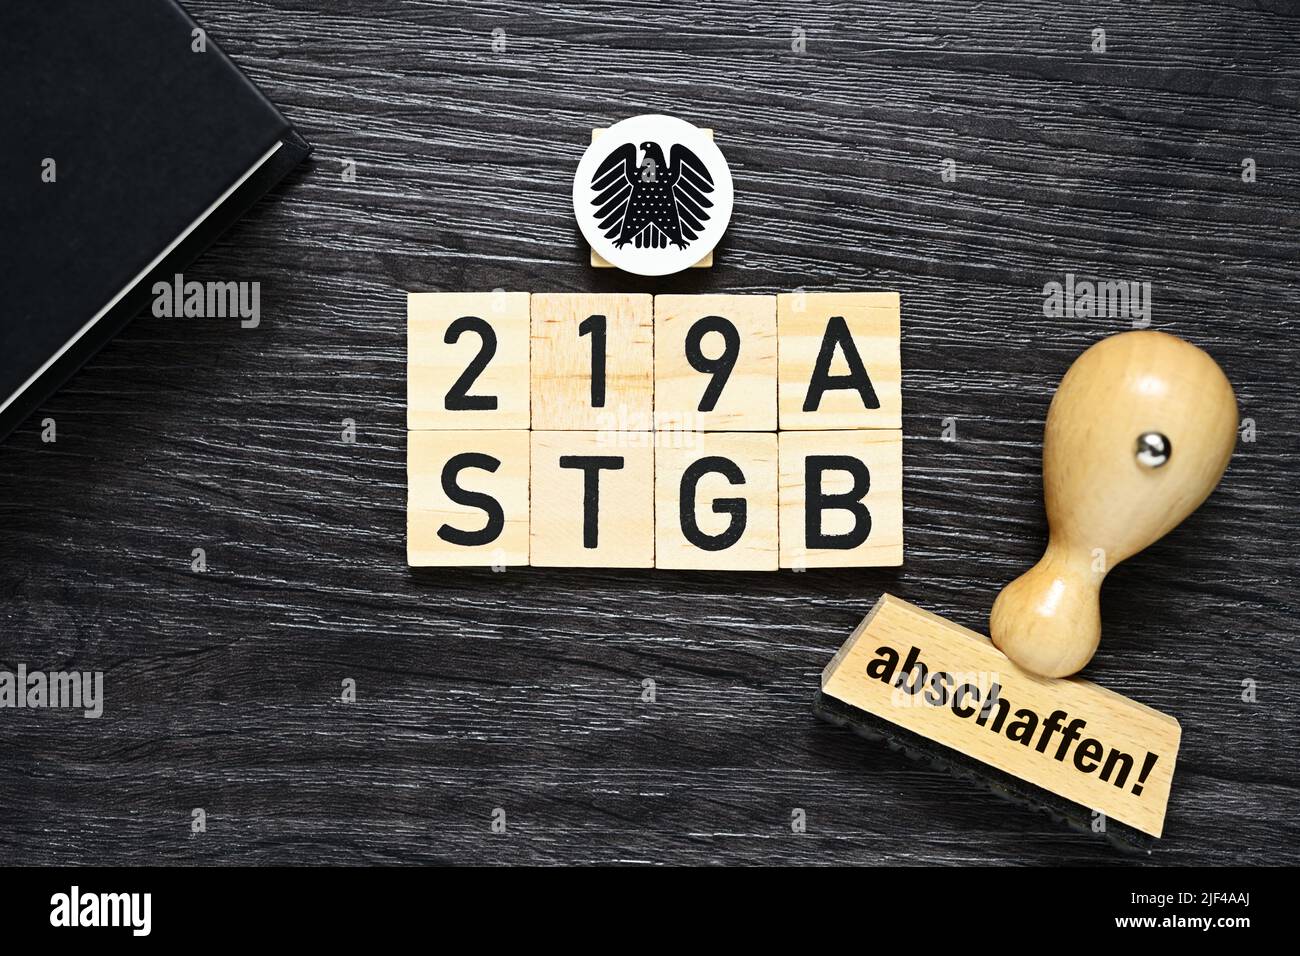 German Paragraph 219a, Abortion Law, Symbolic Image Stock Photo